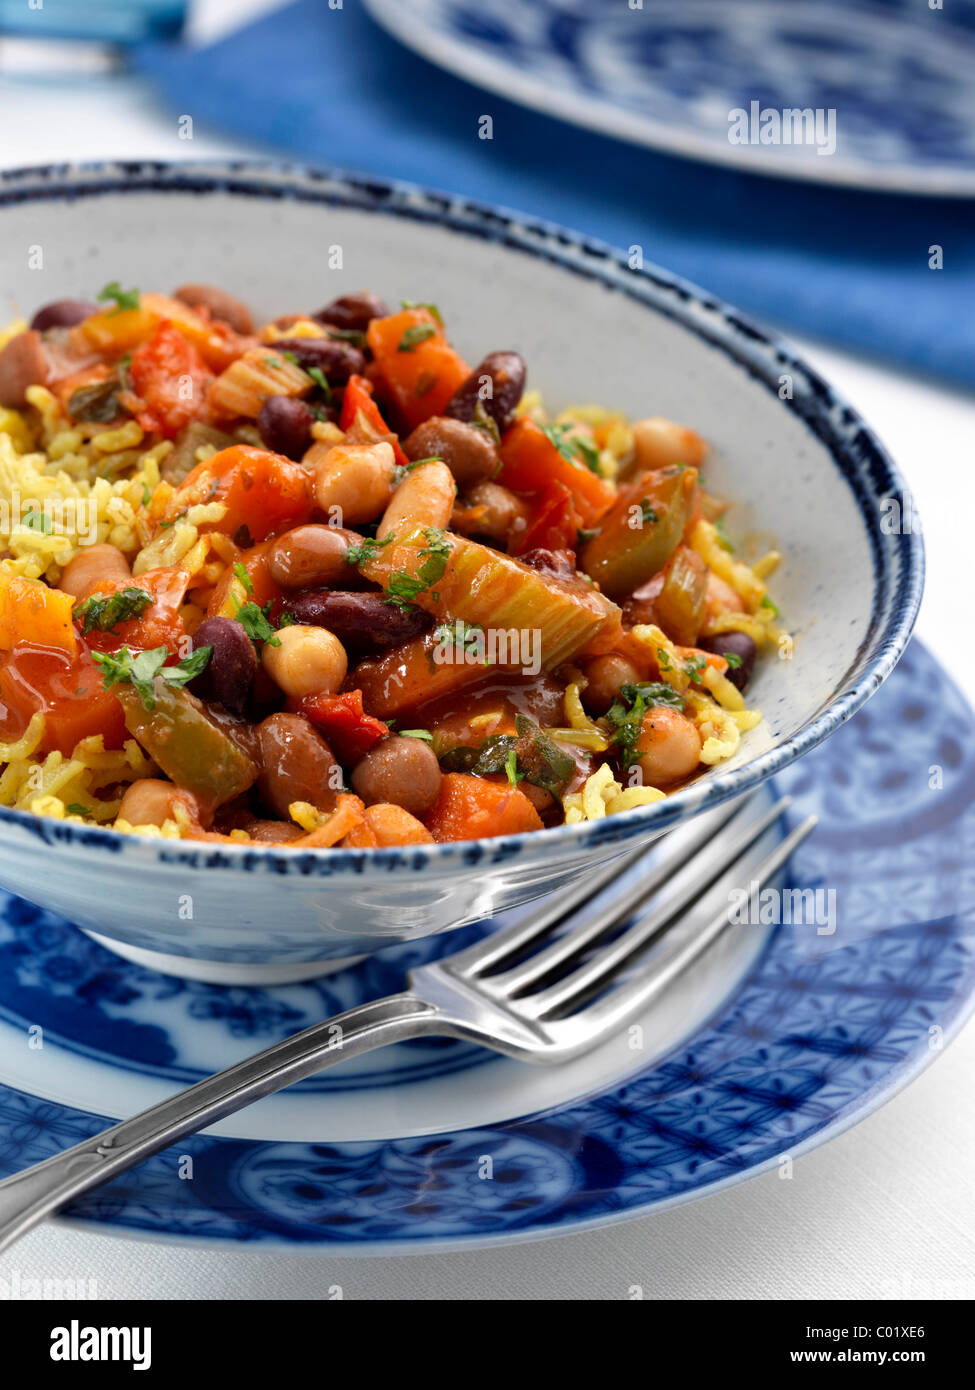 Individual portion of red kidney beans chickpeas and rice salad Stock Photo